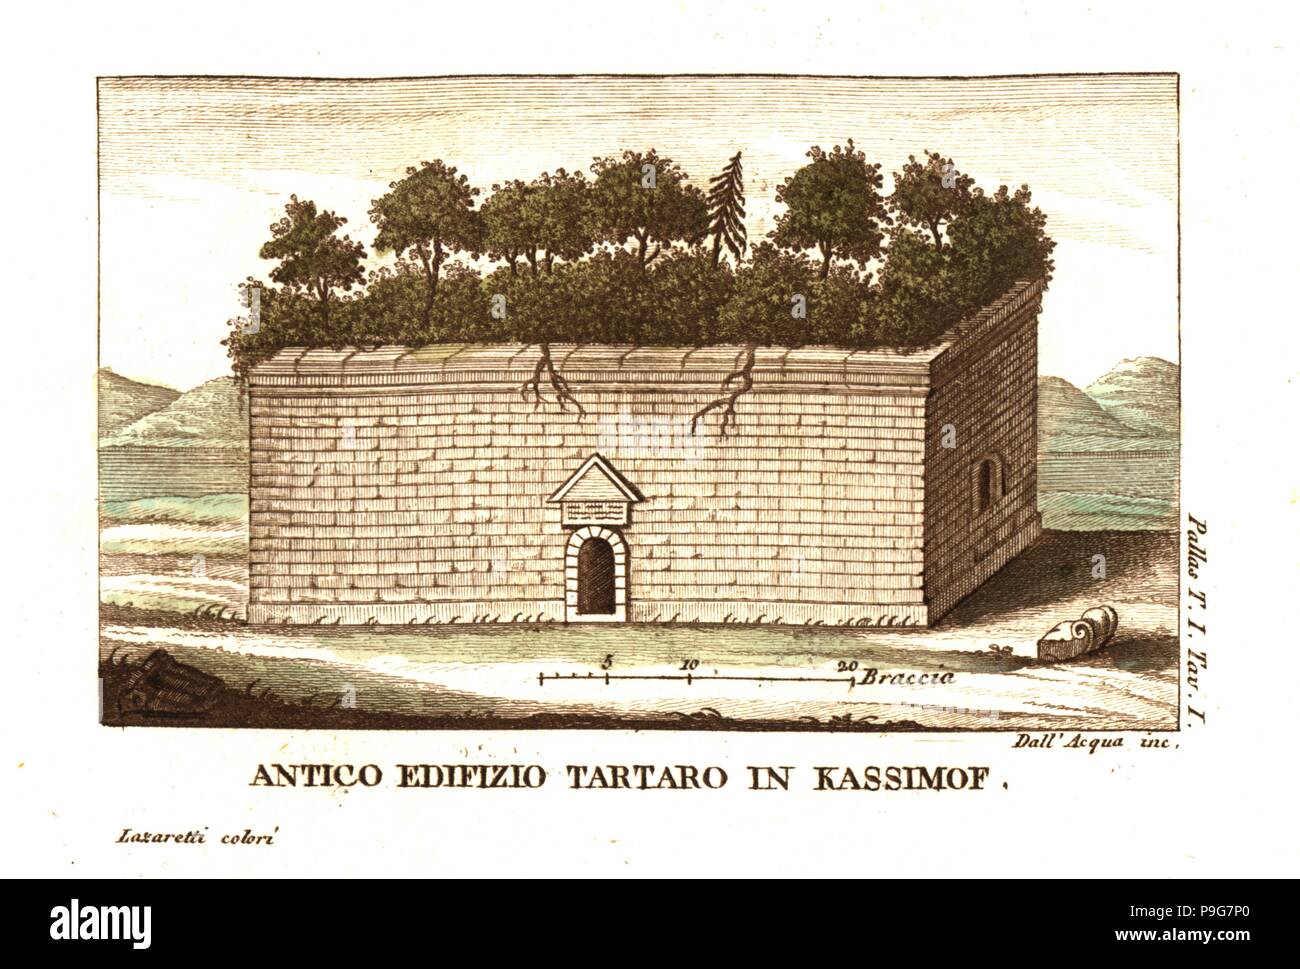 Ancient Tatar tomb of a Khan in Kasimov on the Oka River (Ryazan Oblast, Russia). Illustration by Mounier from Guillaume-Antoine Olivier’s Travels in the Ottoman Empire, Egypt and Persia, 1801. Copperplate engraving by Dell'Acqua handcoloured by Lazaretti from Giovanni Battista Sonzogno’s Collection of the Most Interesting Voyages (Raccolta de Viaggi Piu Interessanti), Milan, 1815-1817. Stock Photo